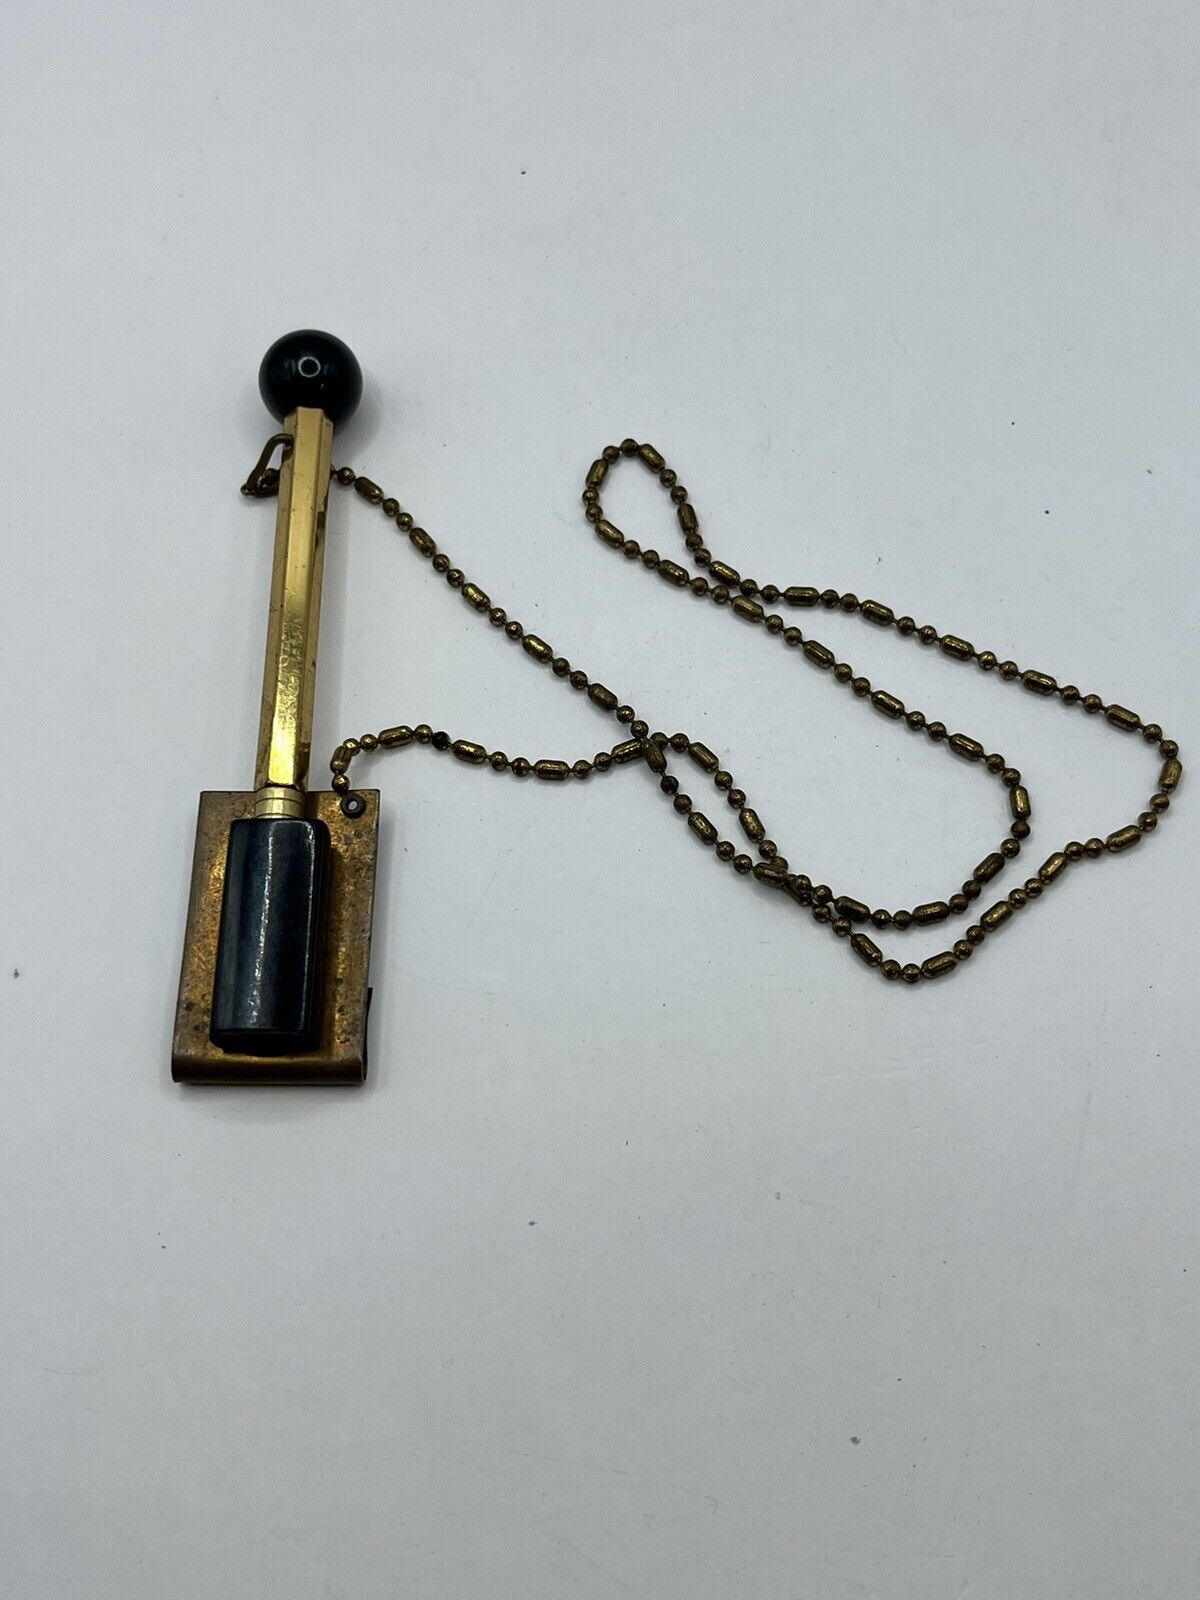 Vintage Tether Pen With Chain And Dock